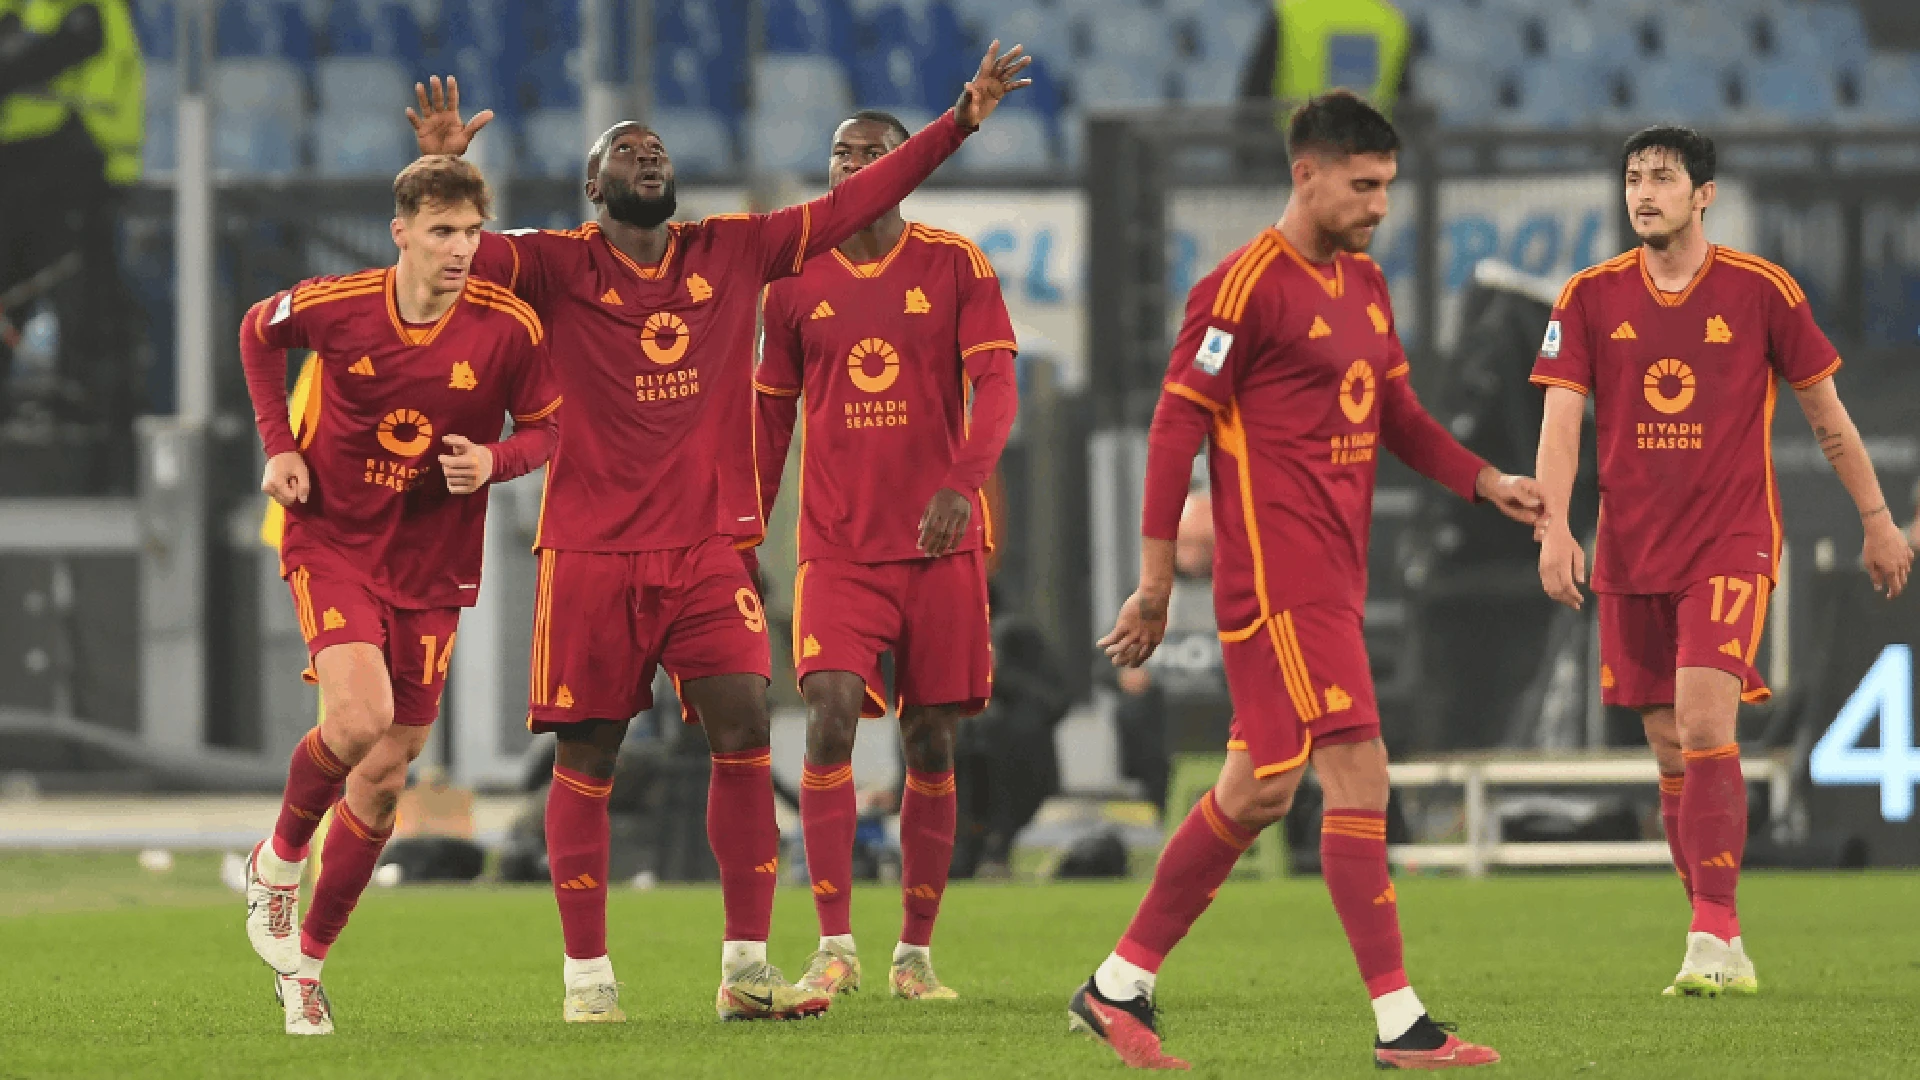 AS Roma v SSC Napoli | Match Highlights | Matchday 17 | Serie A